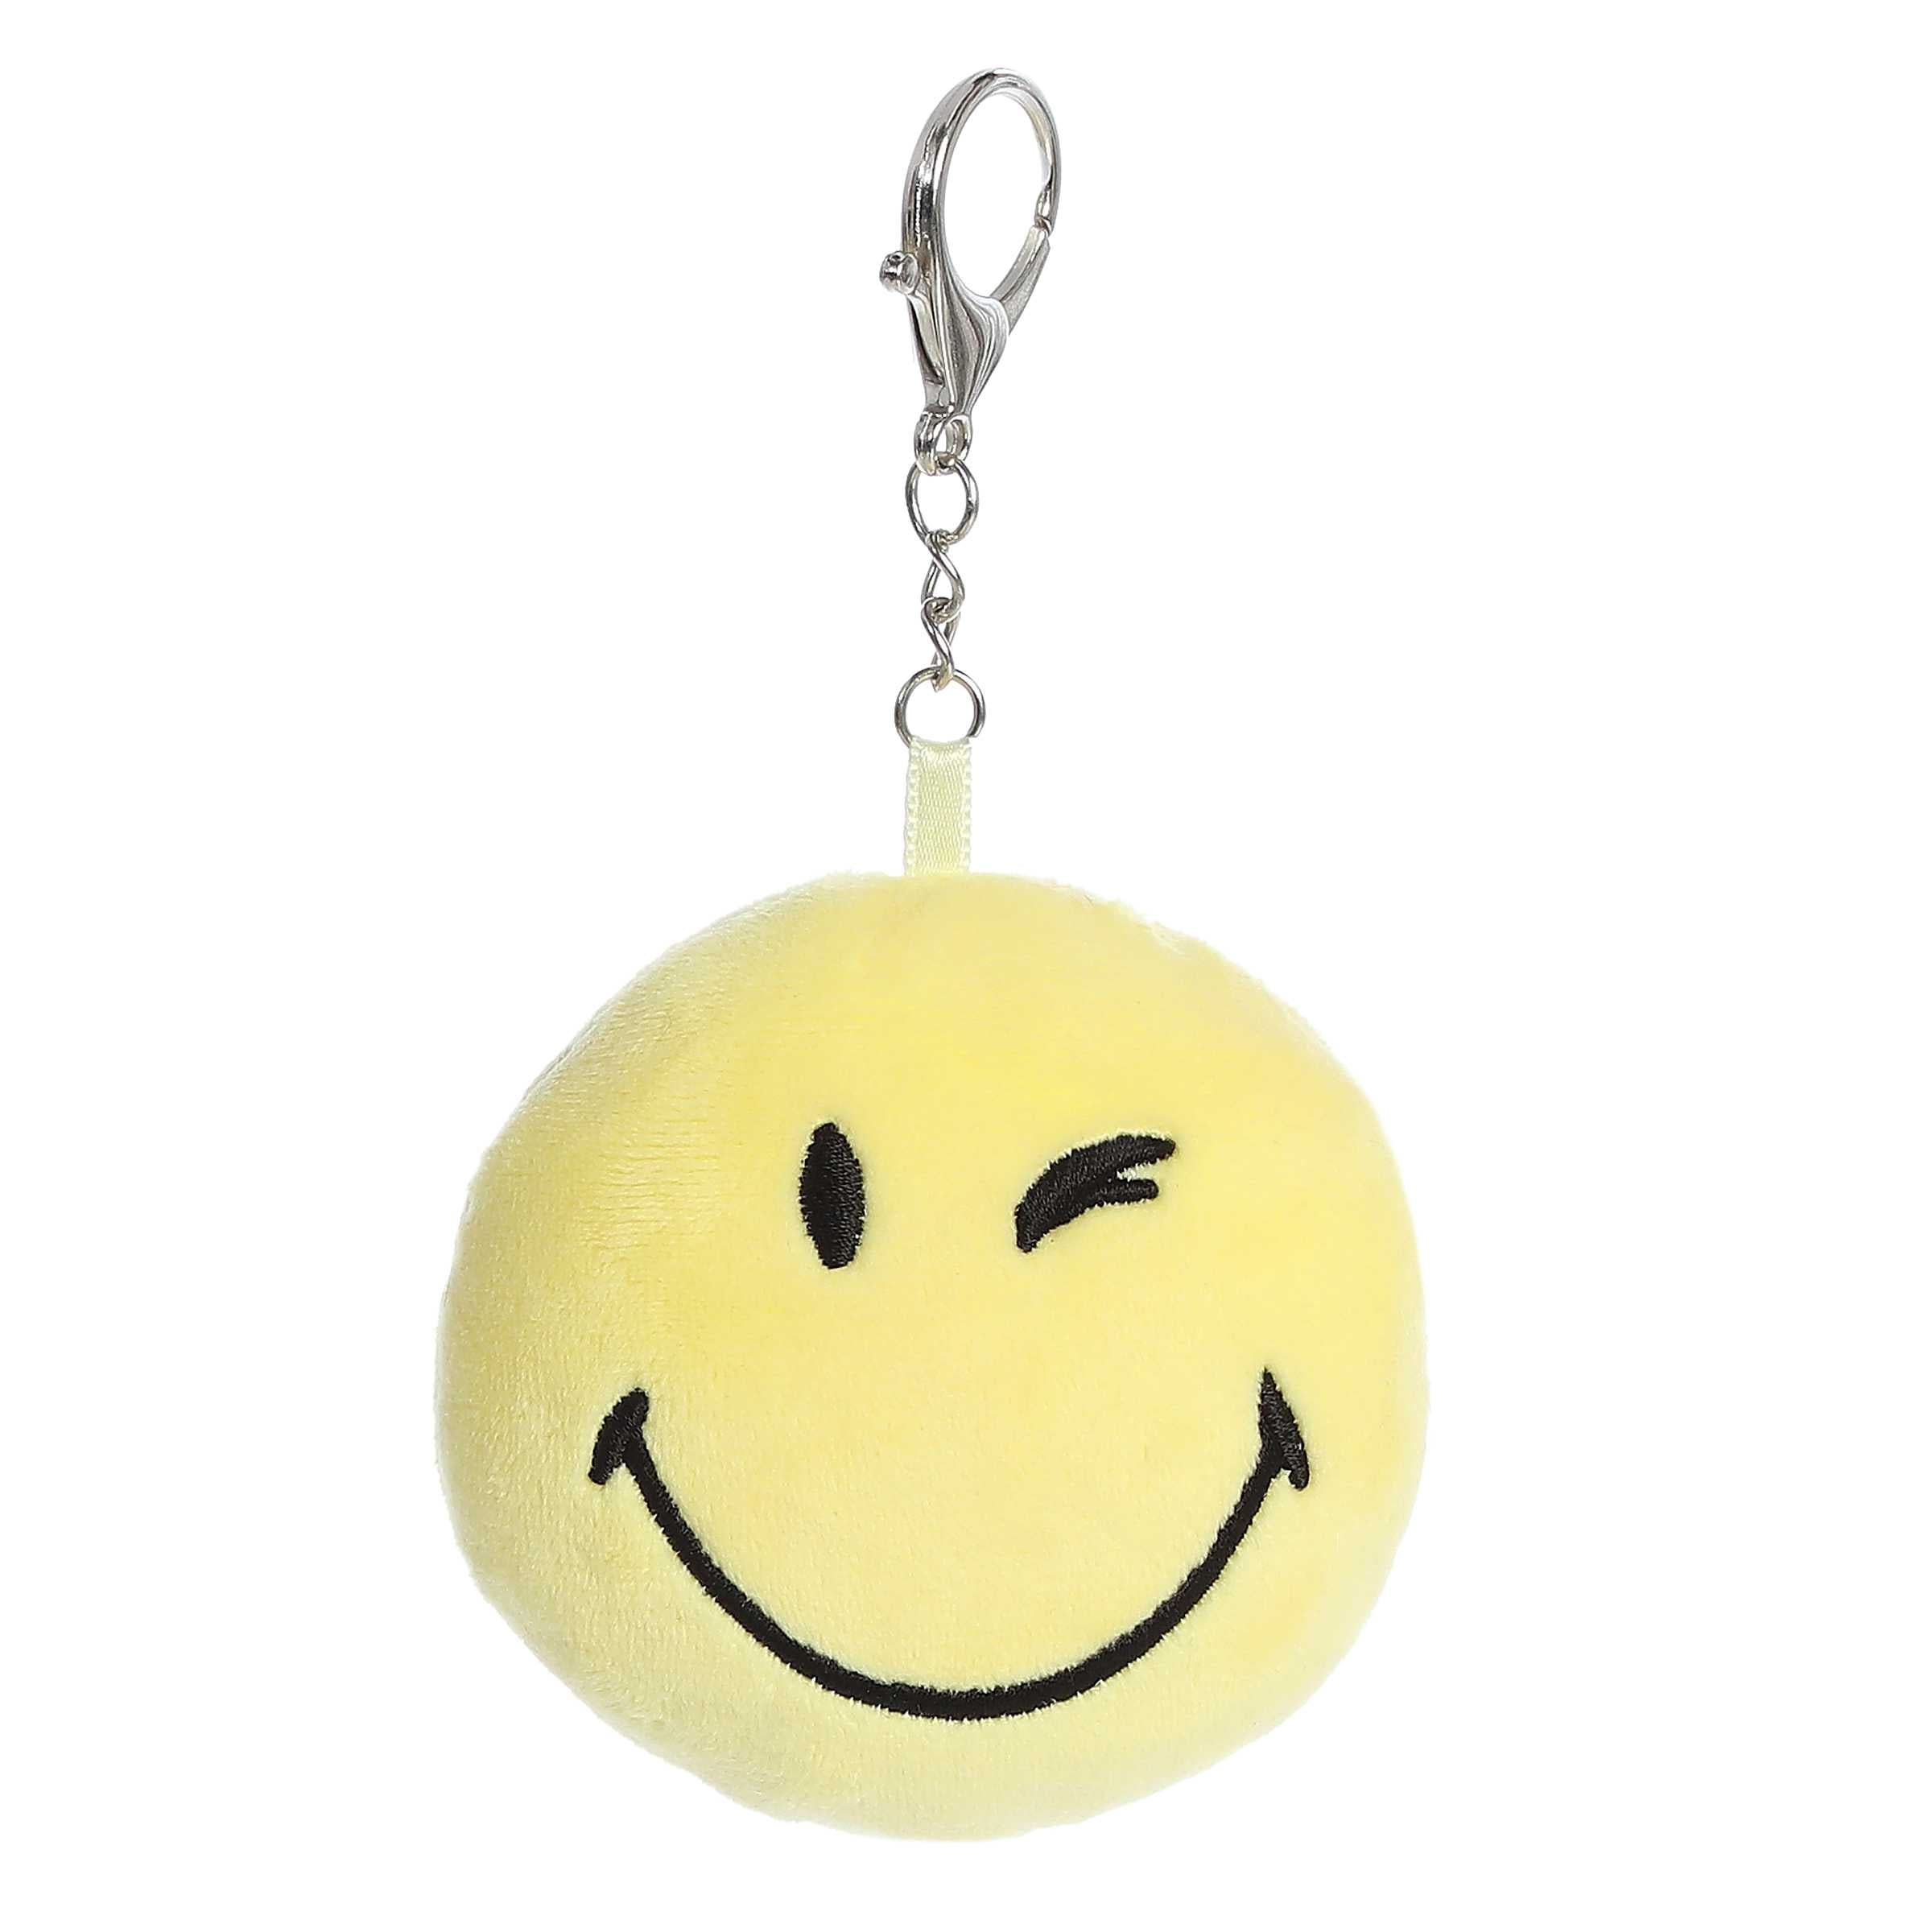 Wink Clip-On from SmileyWorld, a soft and durable winking smiley face keychain